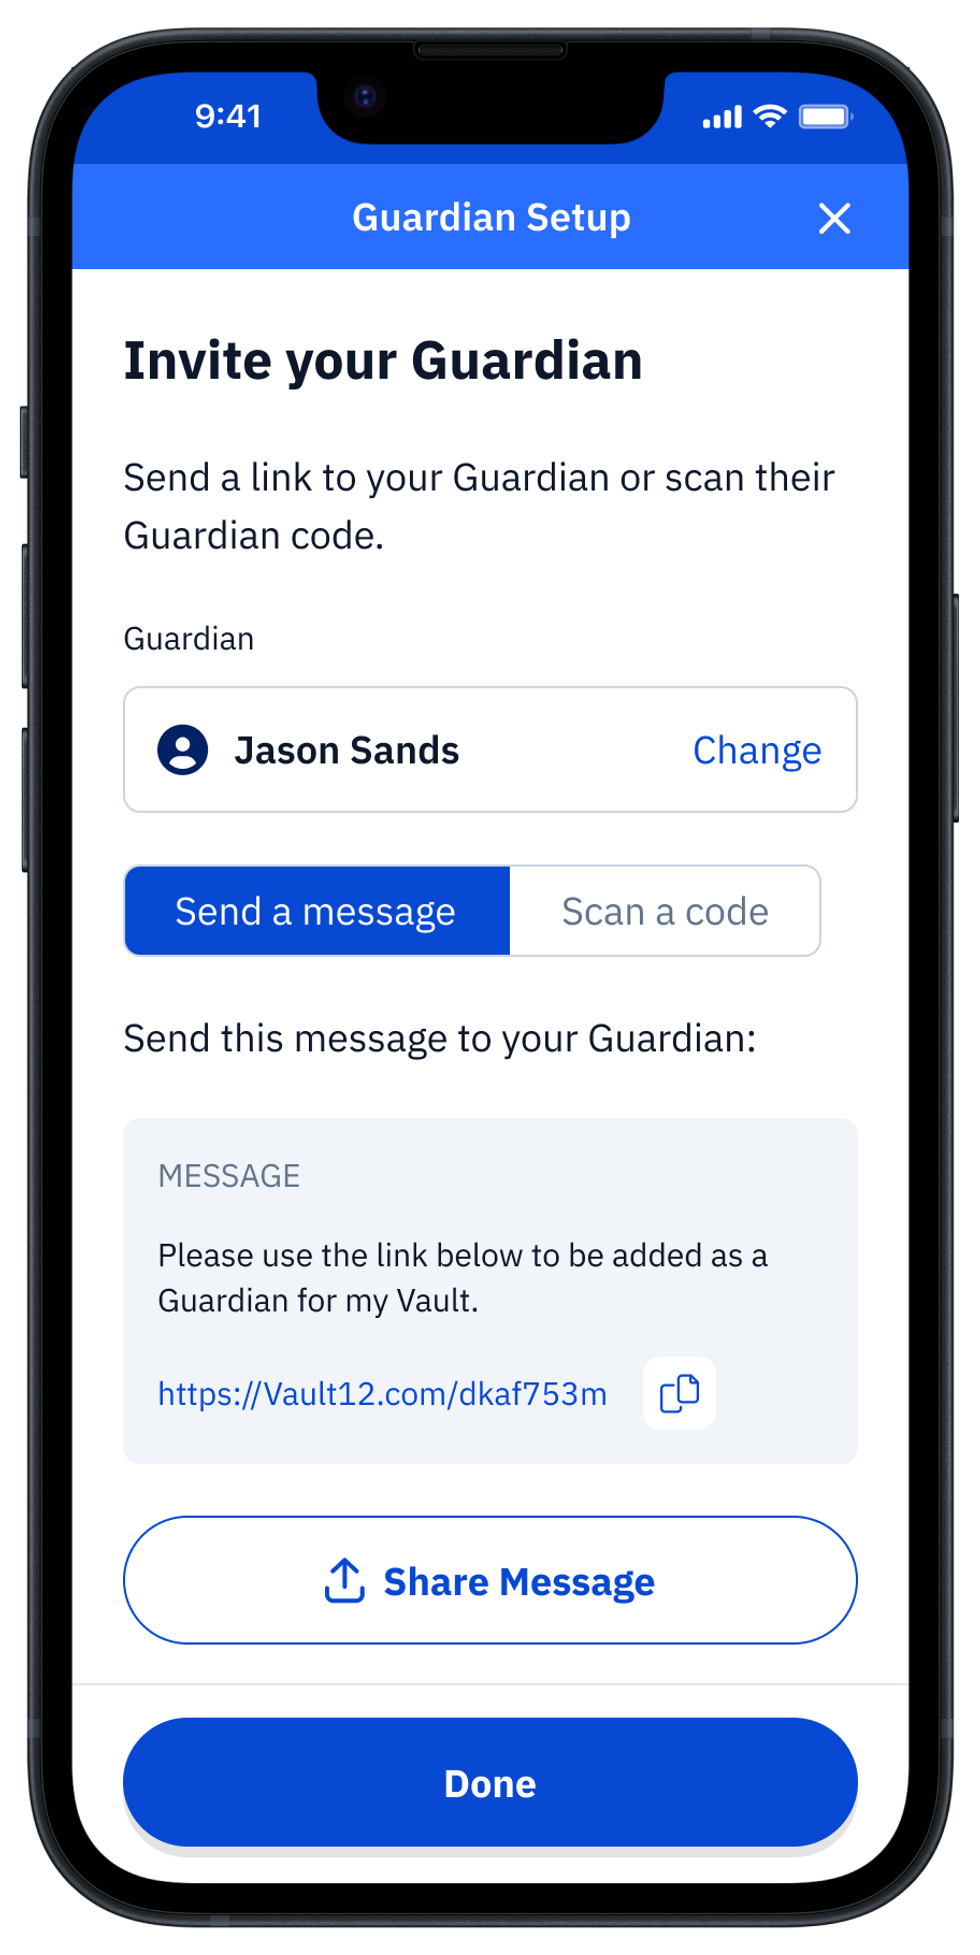 Guard app "Invite your Guardian" by sending a message